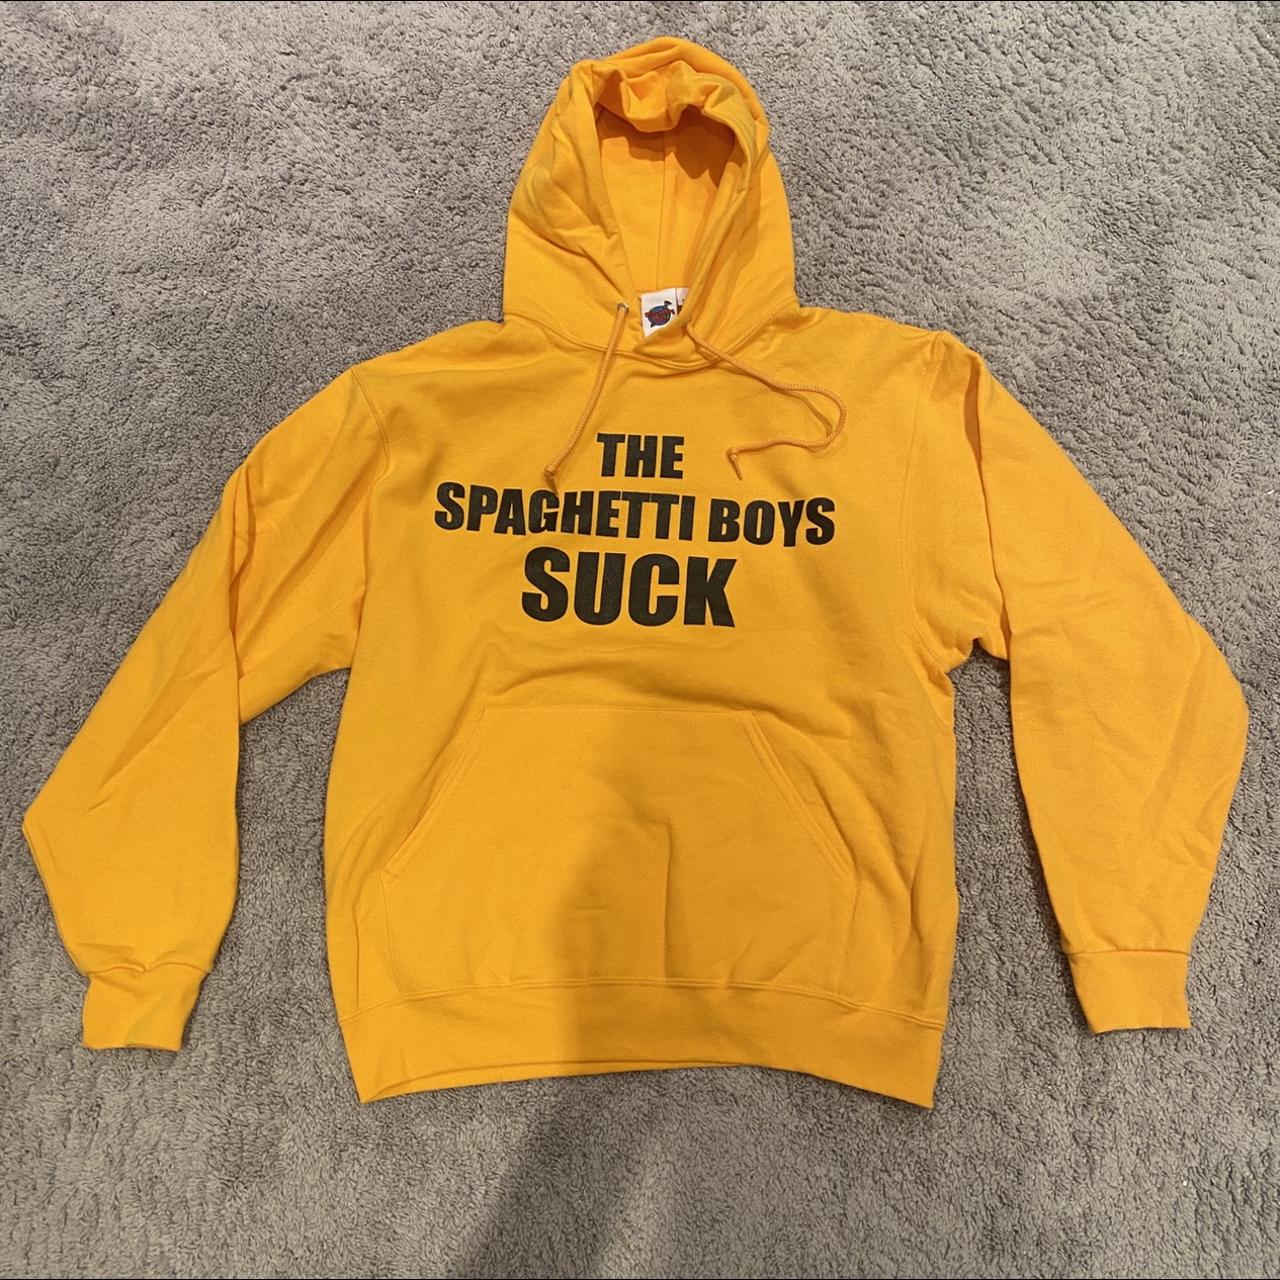 Spaghetti boys hoodie - New - Bought from Nubian Tokyo